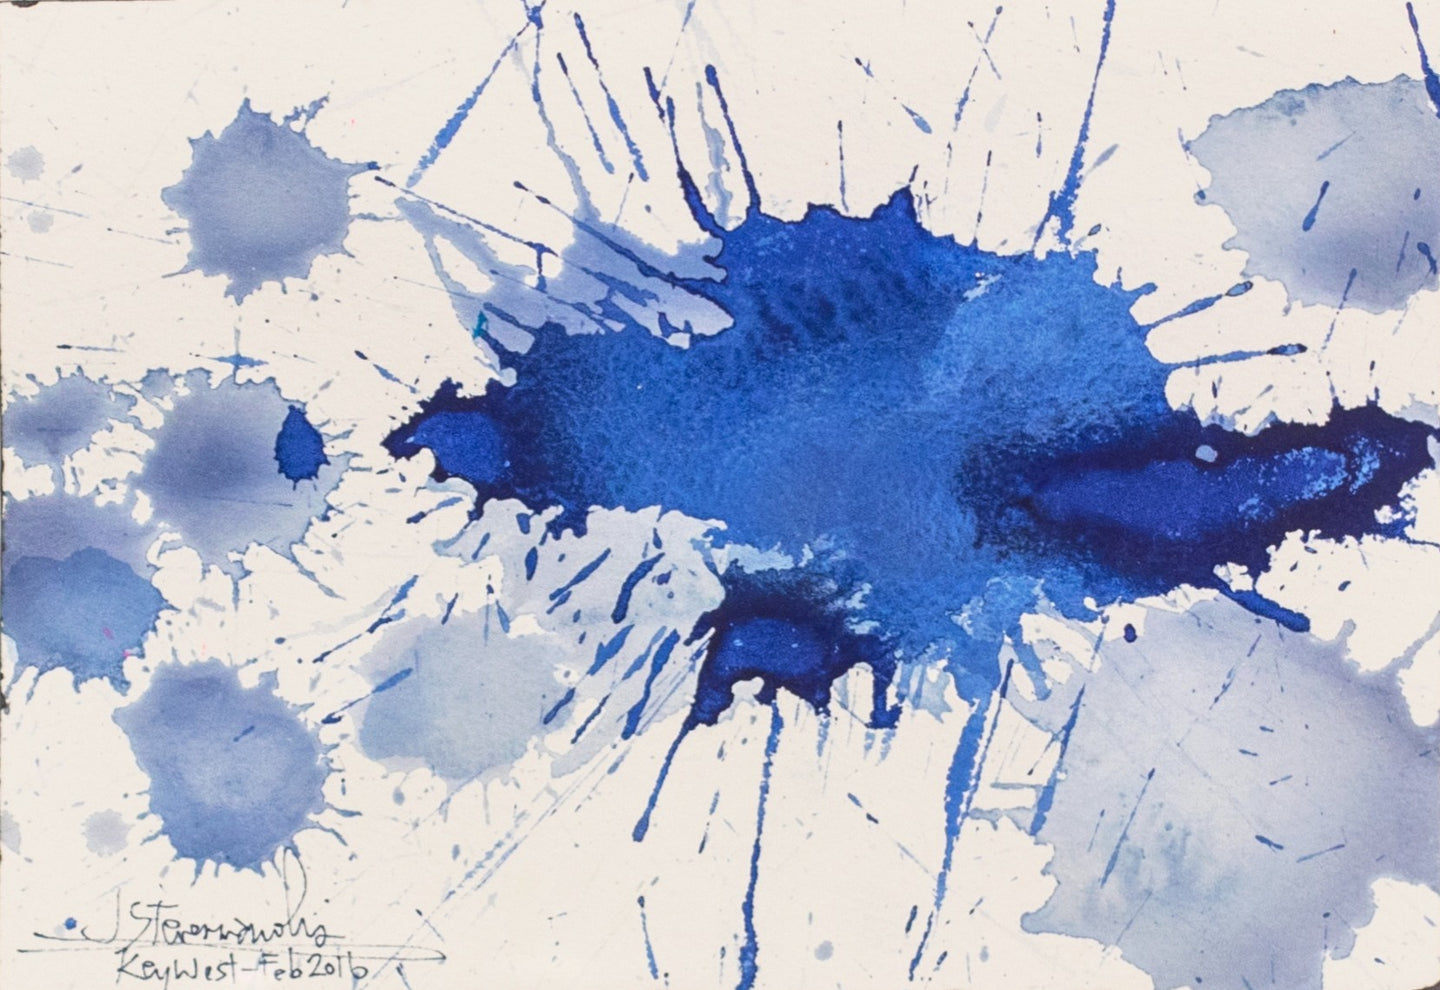 J. Steven Manolis, Splash (Key West) 07.10.07, 2016, Watercolor painting Arches paper, 7 x 10 inches, Blue Abstract Art, Splash Art for sale at Manolis Projects Art Gallery, Miami, Fl